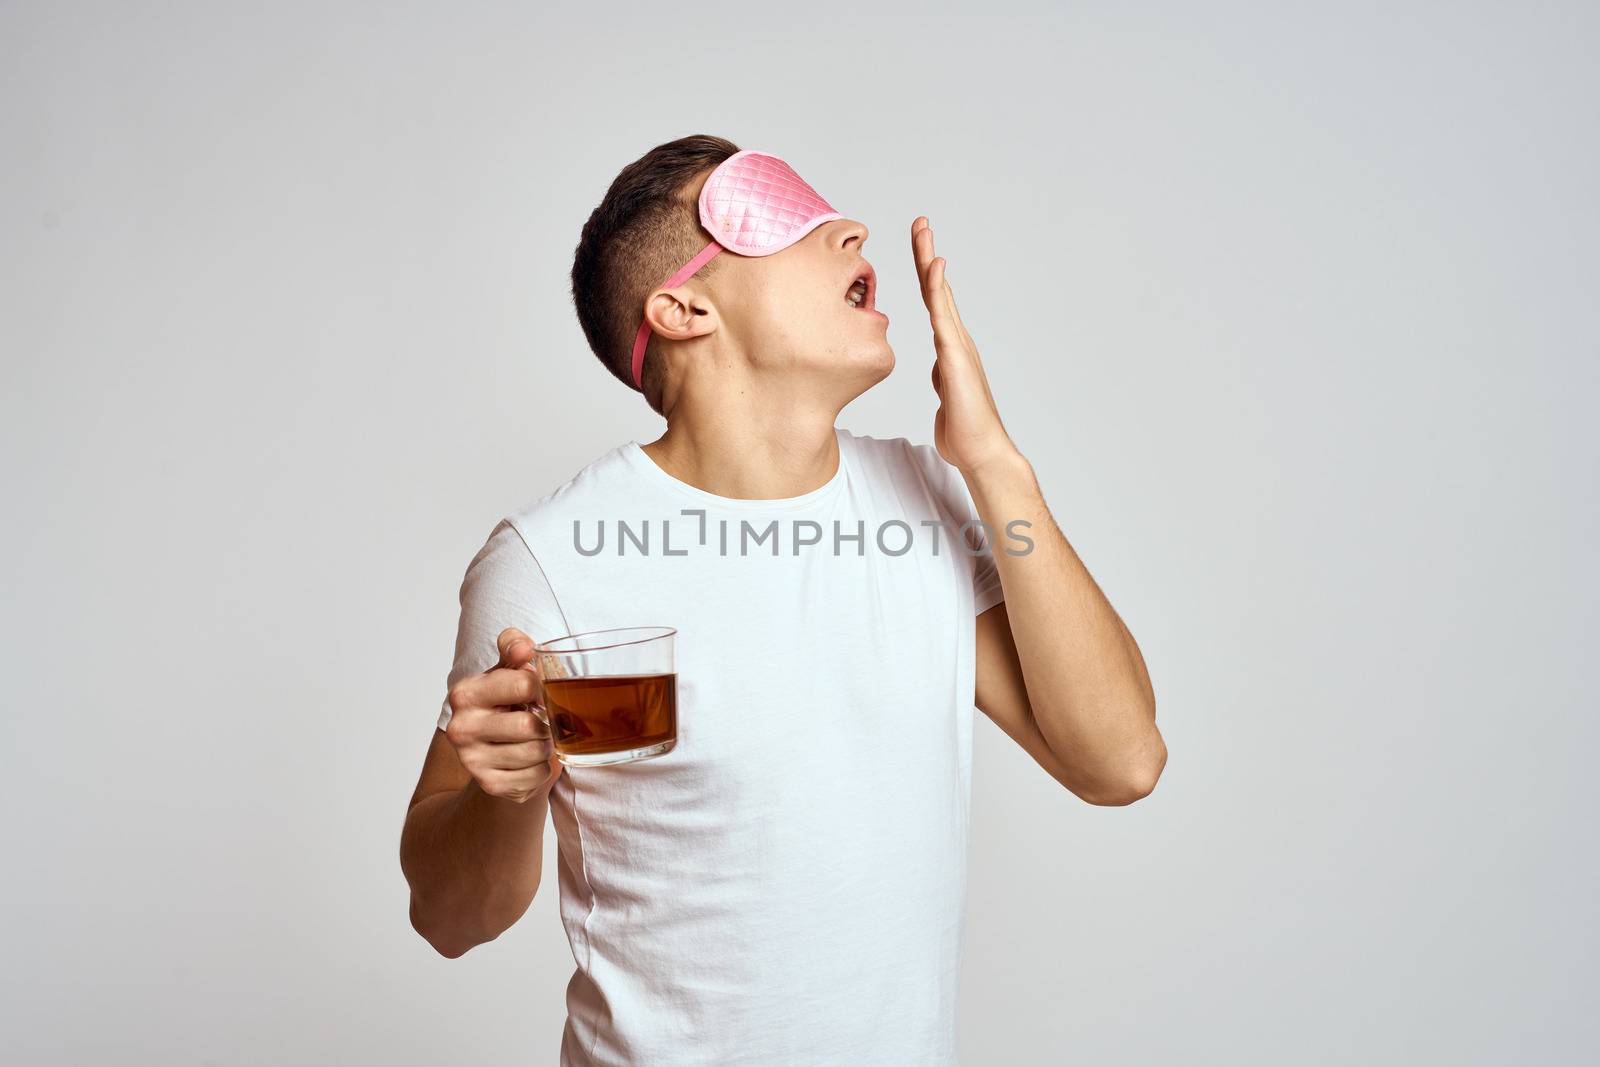 handsome man with pink sleep mask and with a cup of tea in hand pulls himself up on a light background by SHOTPRIME